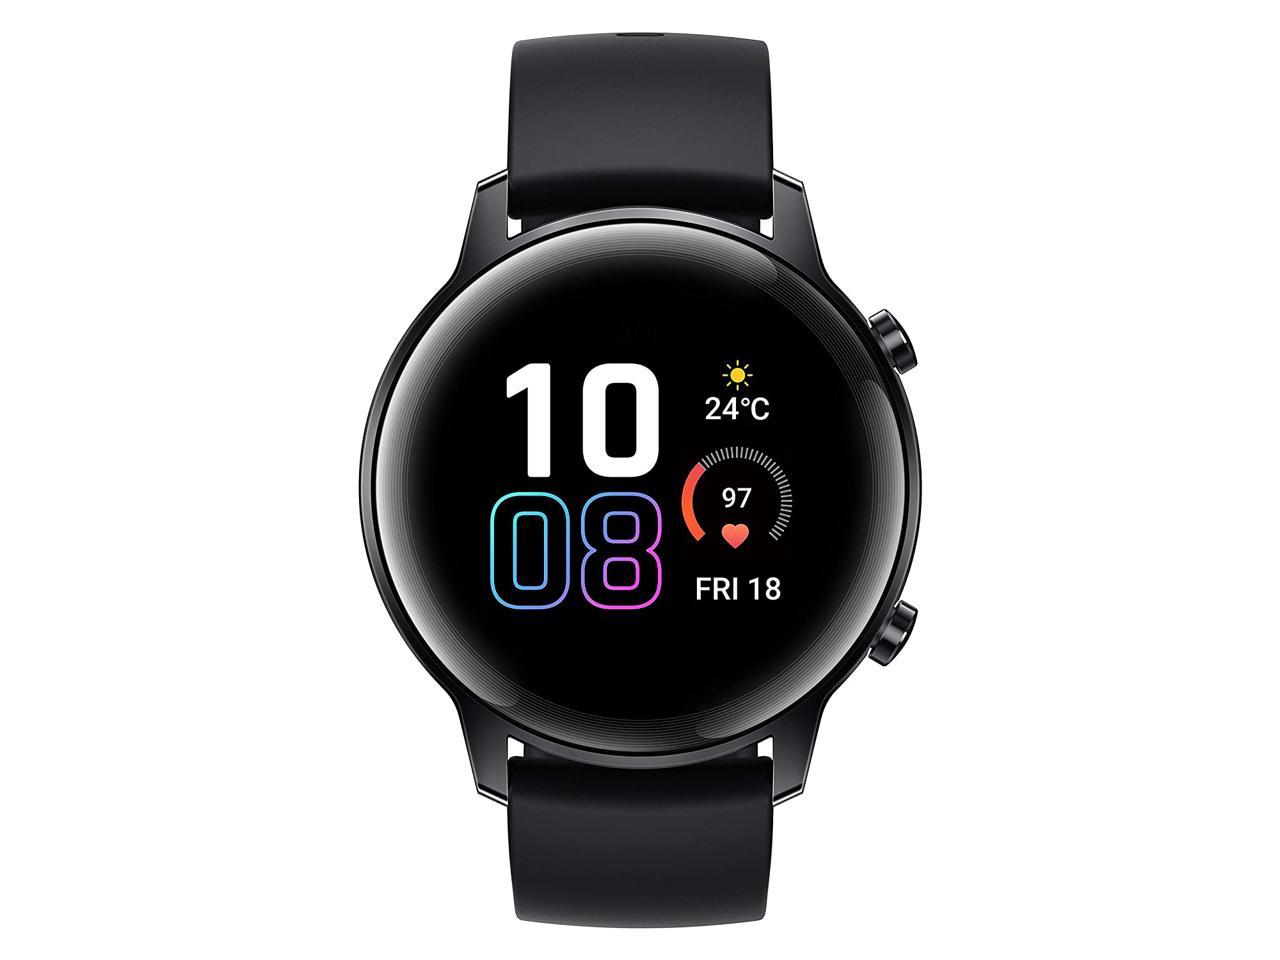 Huawei Honor Magic Watch 2 Bluetooth 5.1 Smart watch Blood Oxygen Saturation Monitor Heart Rate 7-Day Battery Life For Android iOS - Agate Black(42mm)